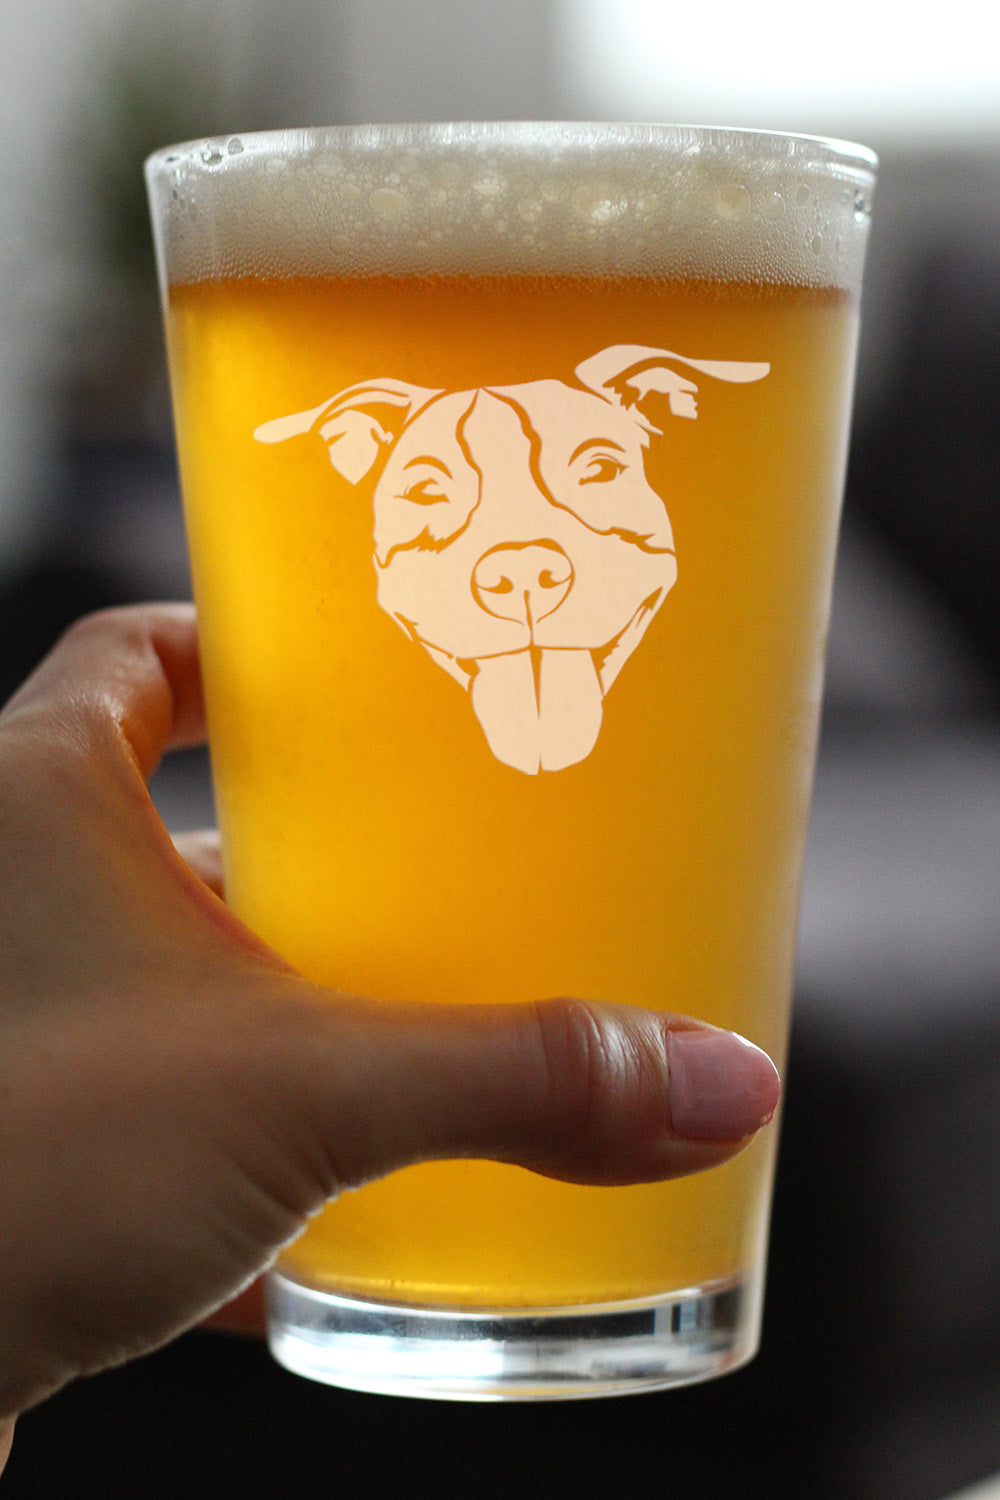 Happy Pitbull - Pint Glass for Beer - Fun Unique Pitbull Themed Dog Gifts and Party Decor for Women and Men - 16 oz